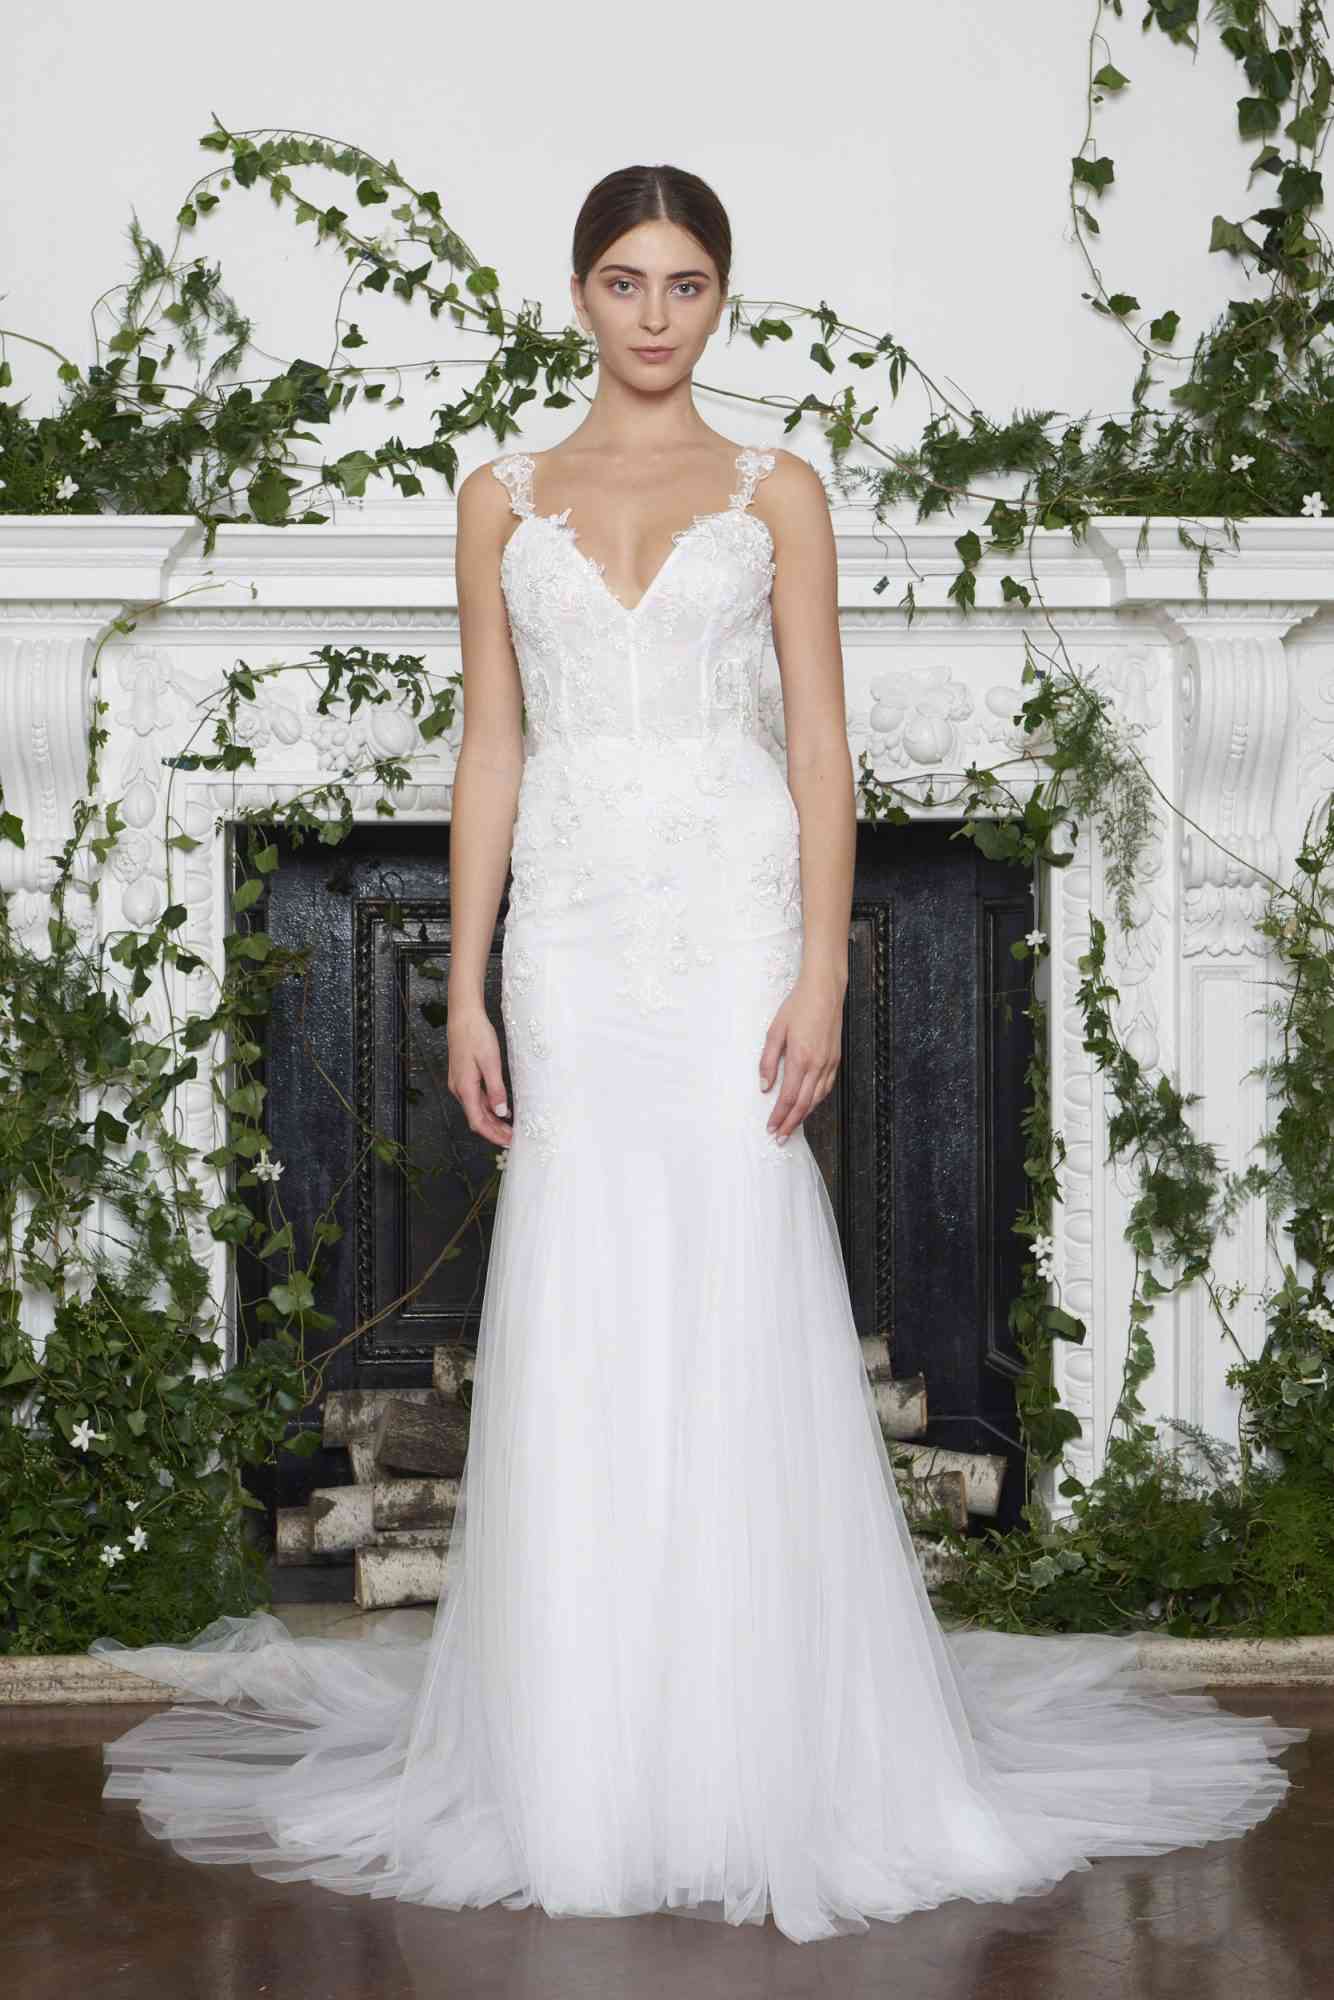 Monique Lhuillier Fall 2018 Slim Mermaid Wedding Dress with Embroidery